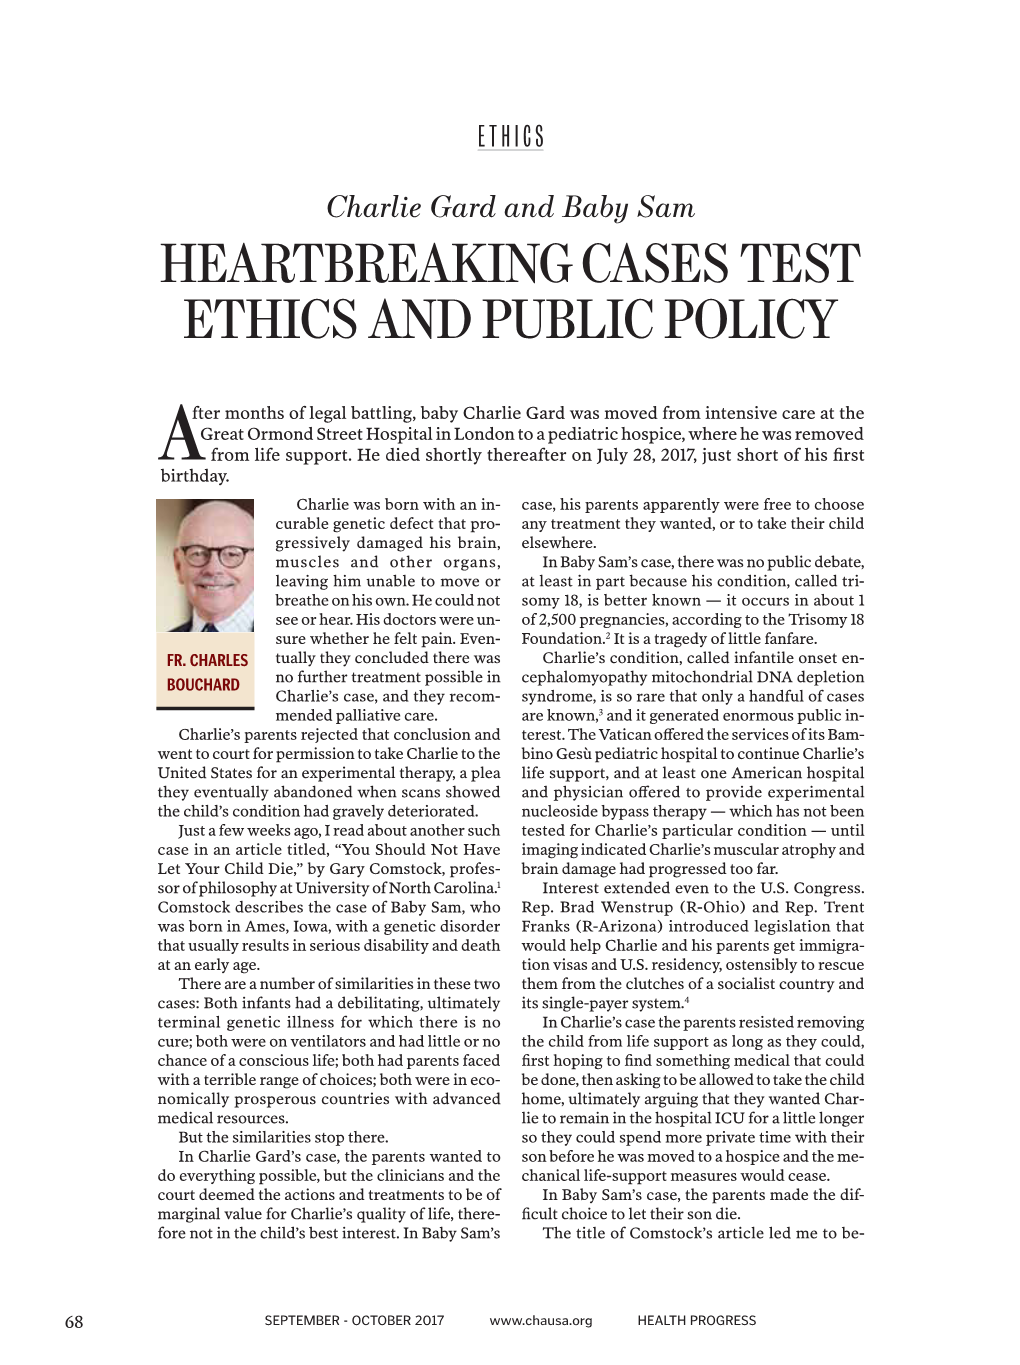 Heartbreaking Cases Test Ethics and Public Policy